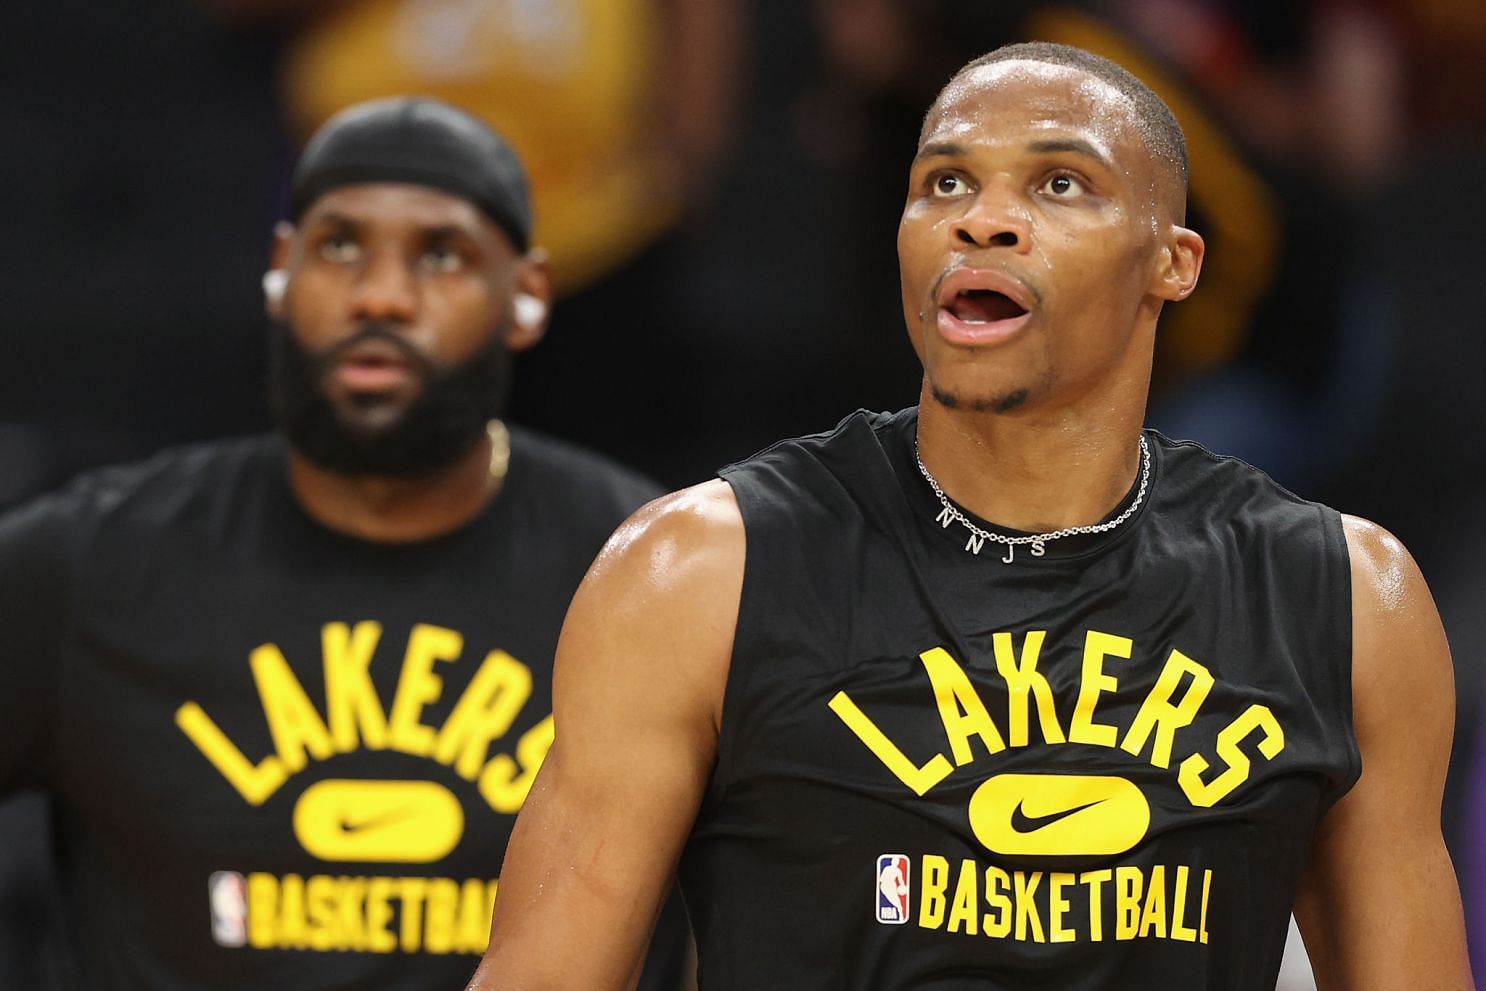 Russell Westbrook practicing with LeBron James [Source: Los Angeles Times]